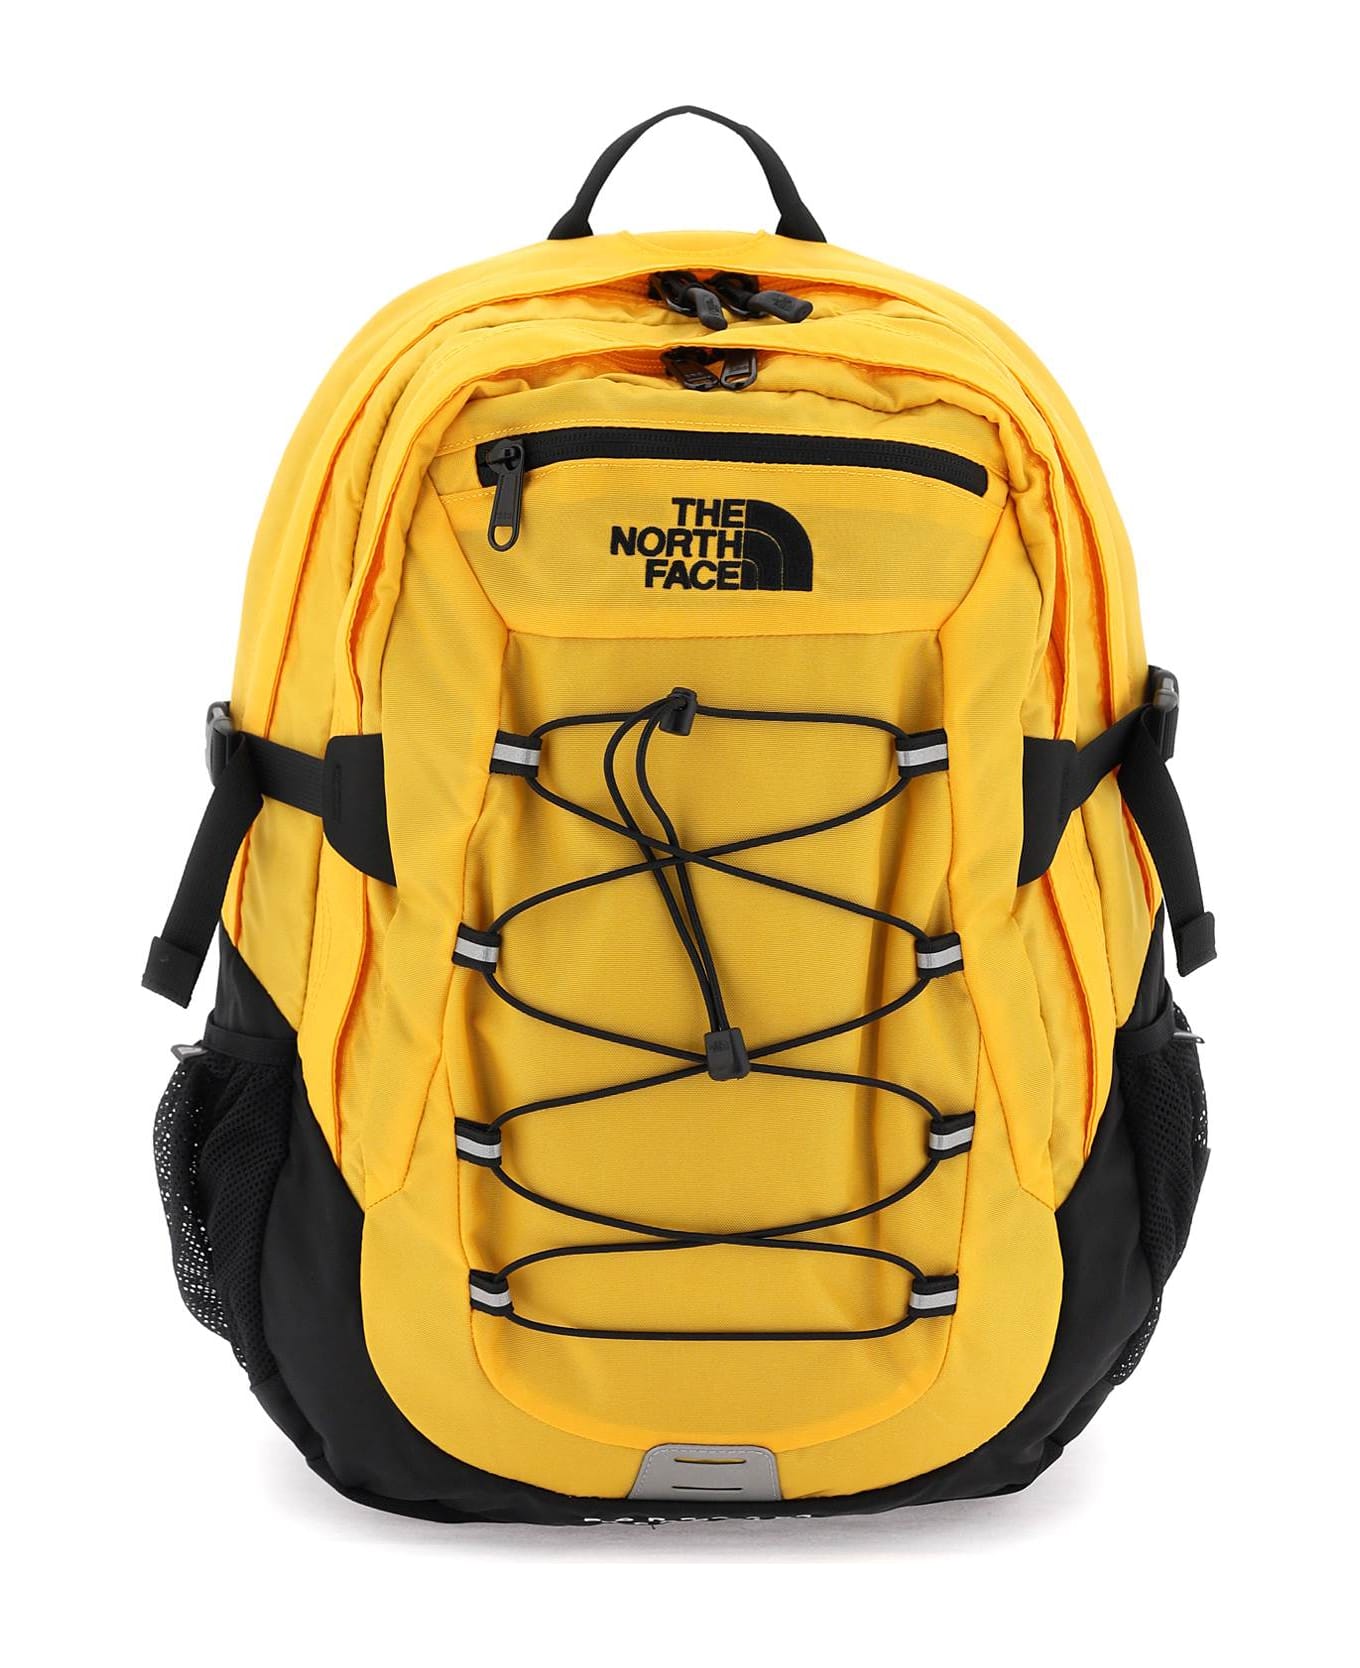 The North Face Borealis Classic Backpack - SUMMIT GOLD TNF BLACK (Yellow)